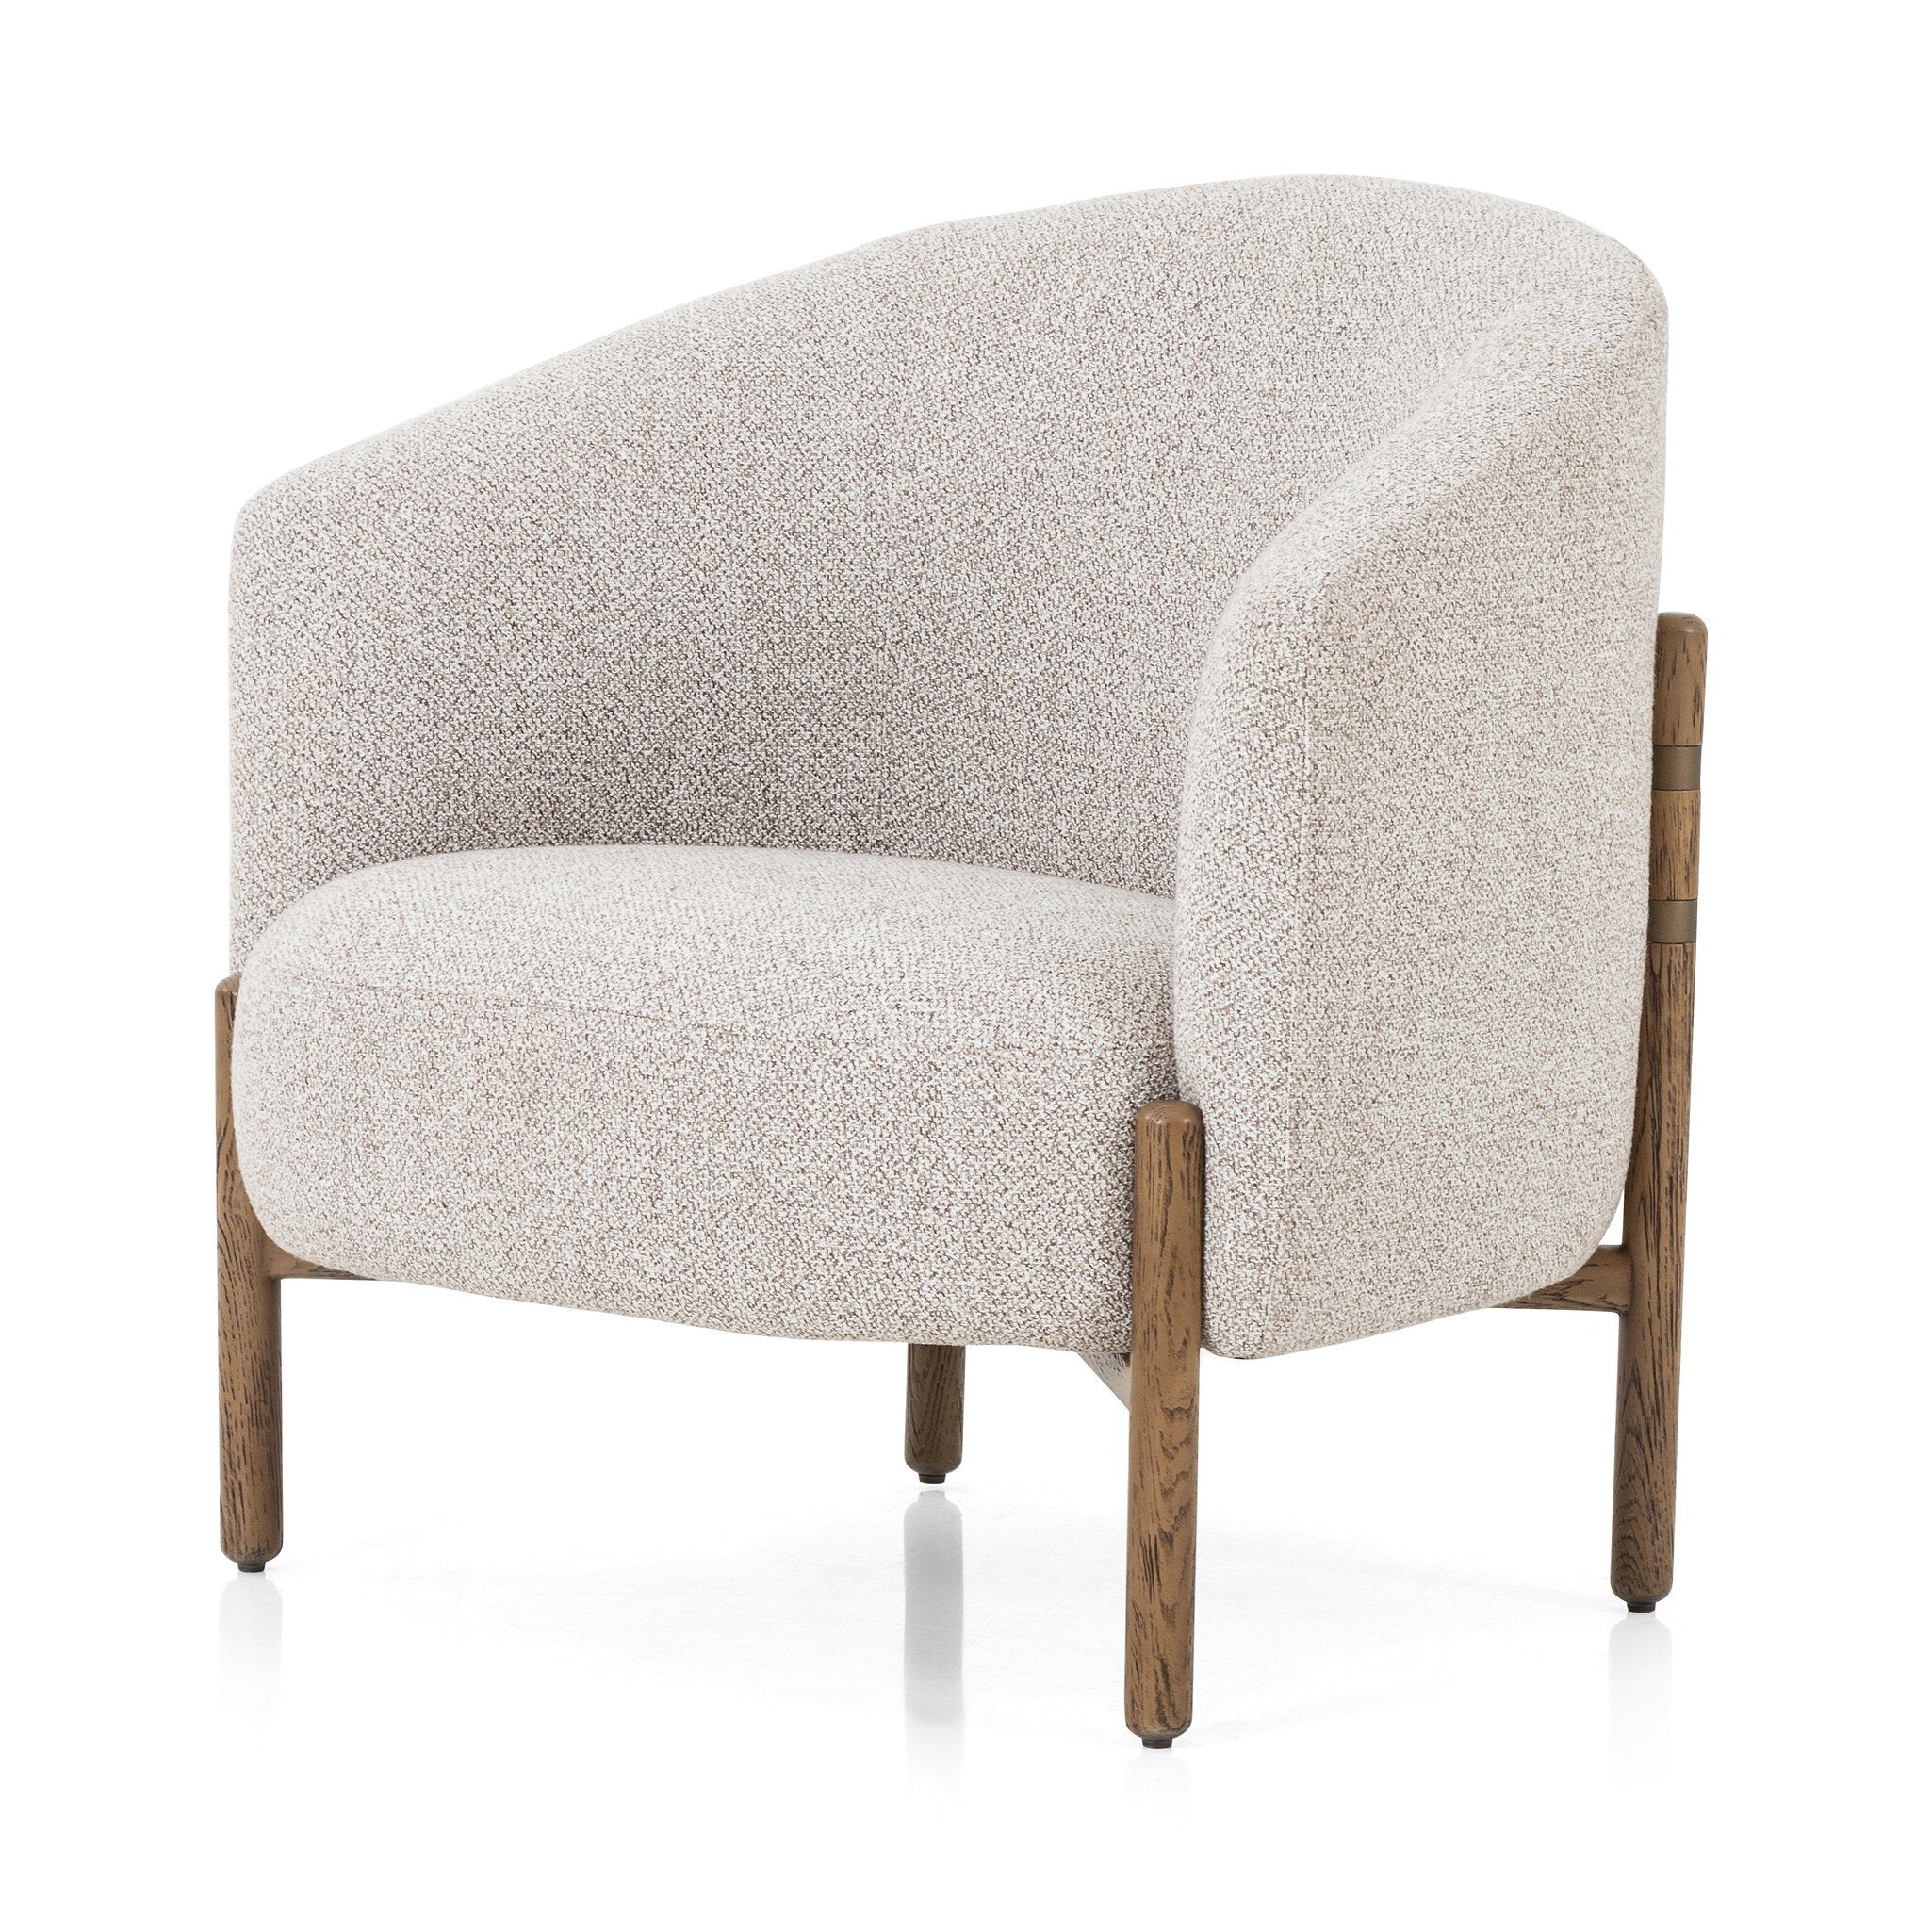 Enfield Chair - Astor Stone